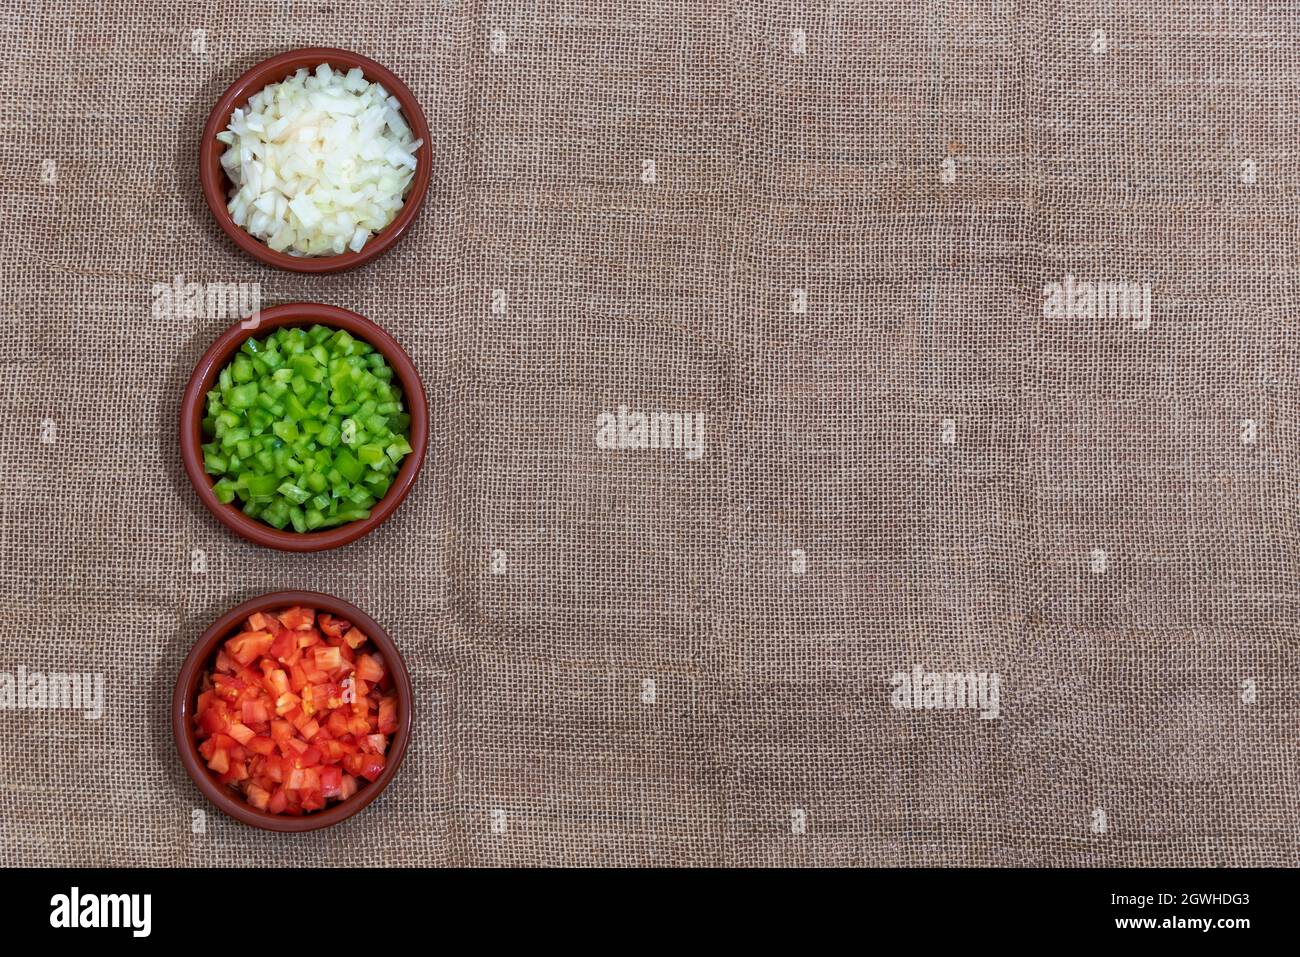 Background of rough fabric and brown color, with three small clay dishes with the ingredients of the sauce, onion, pepper and tomato.Copy space. Stock Photo